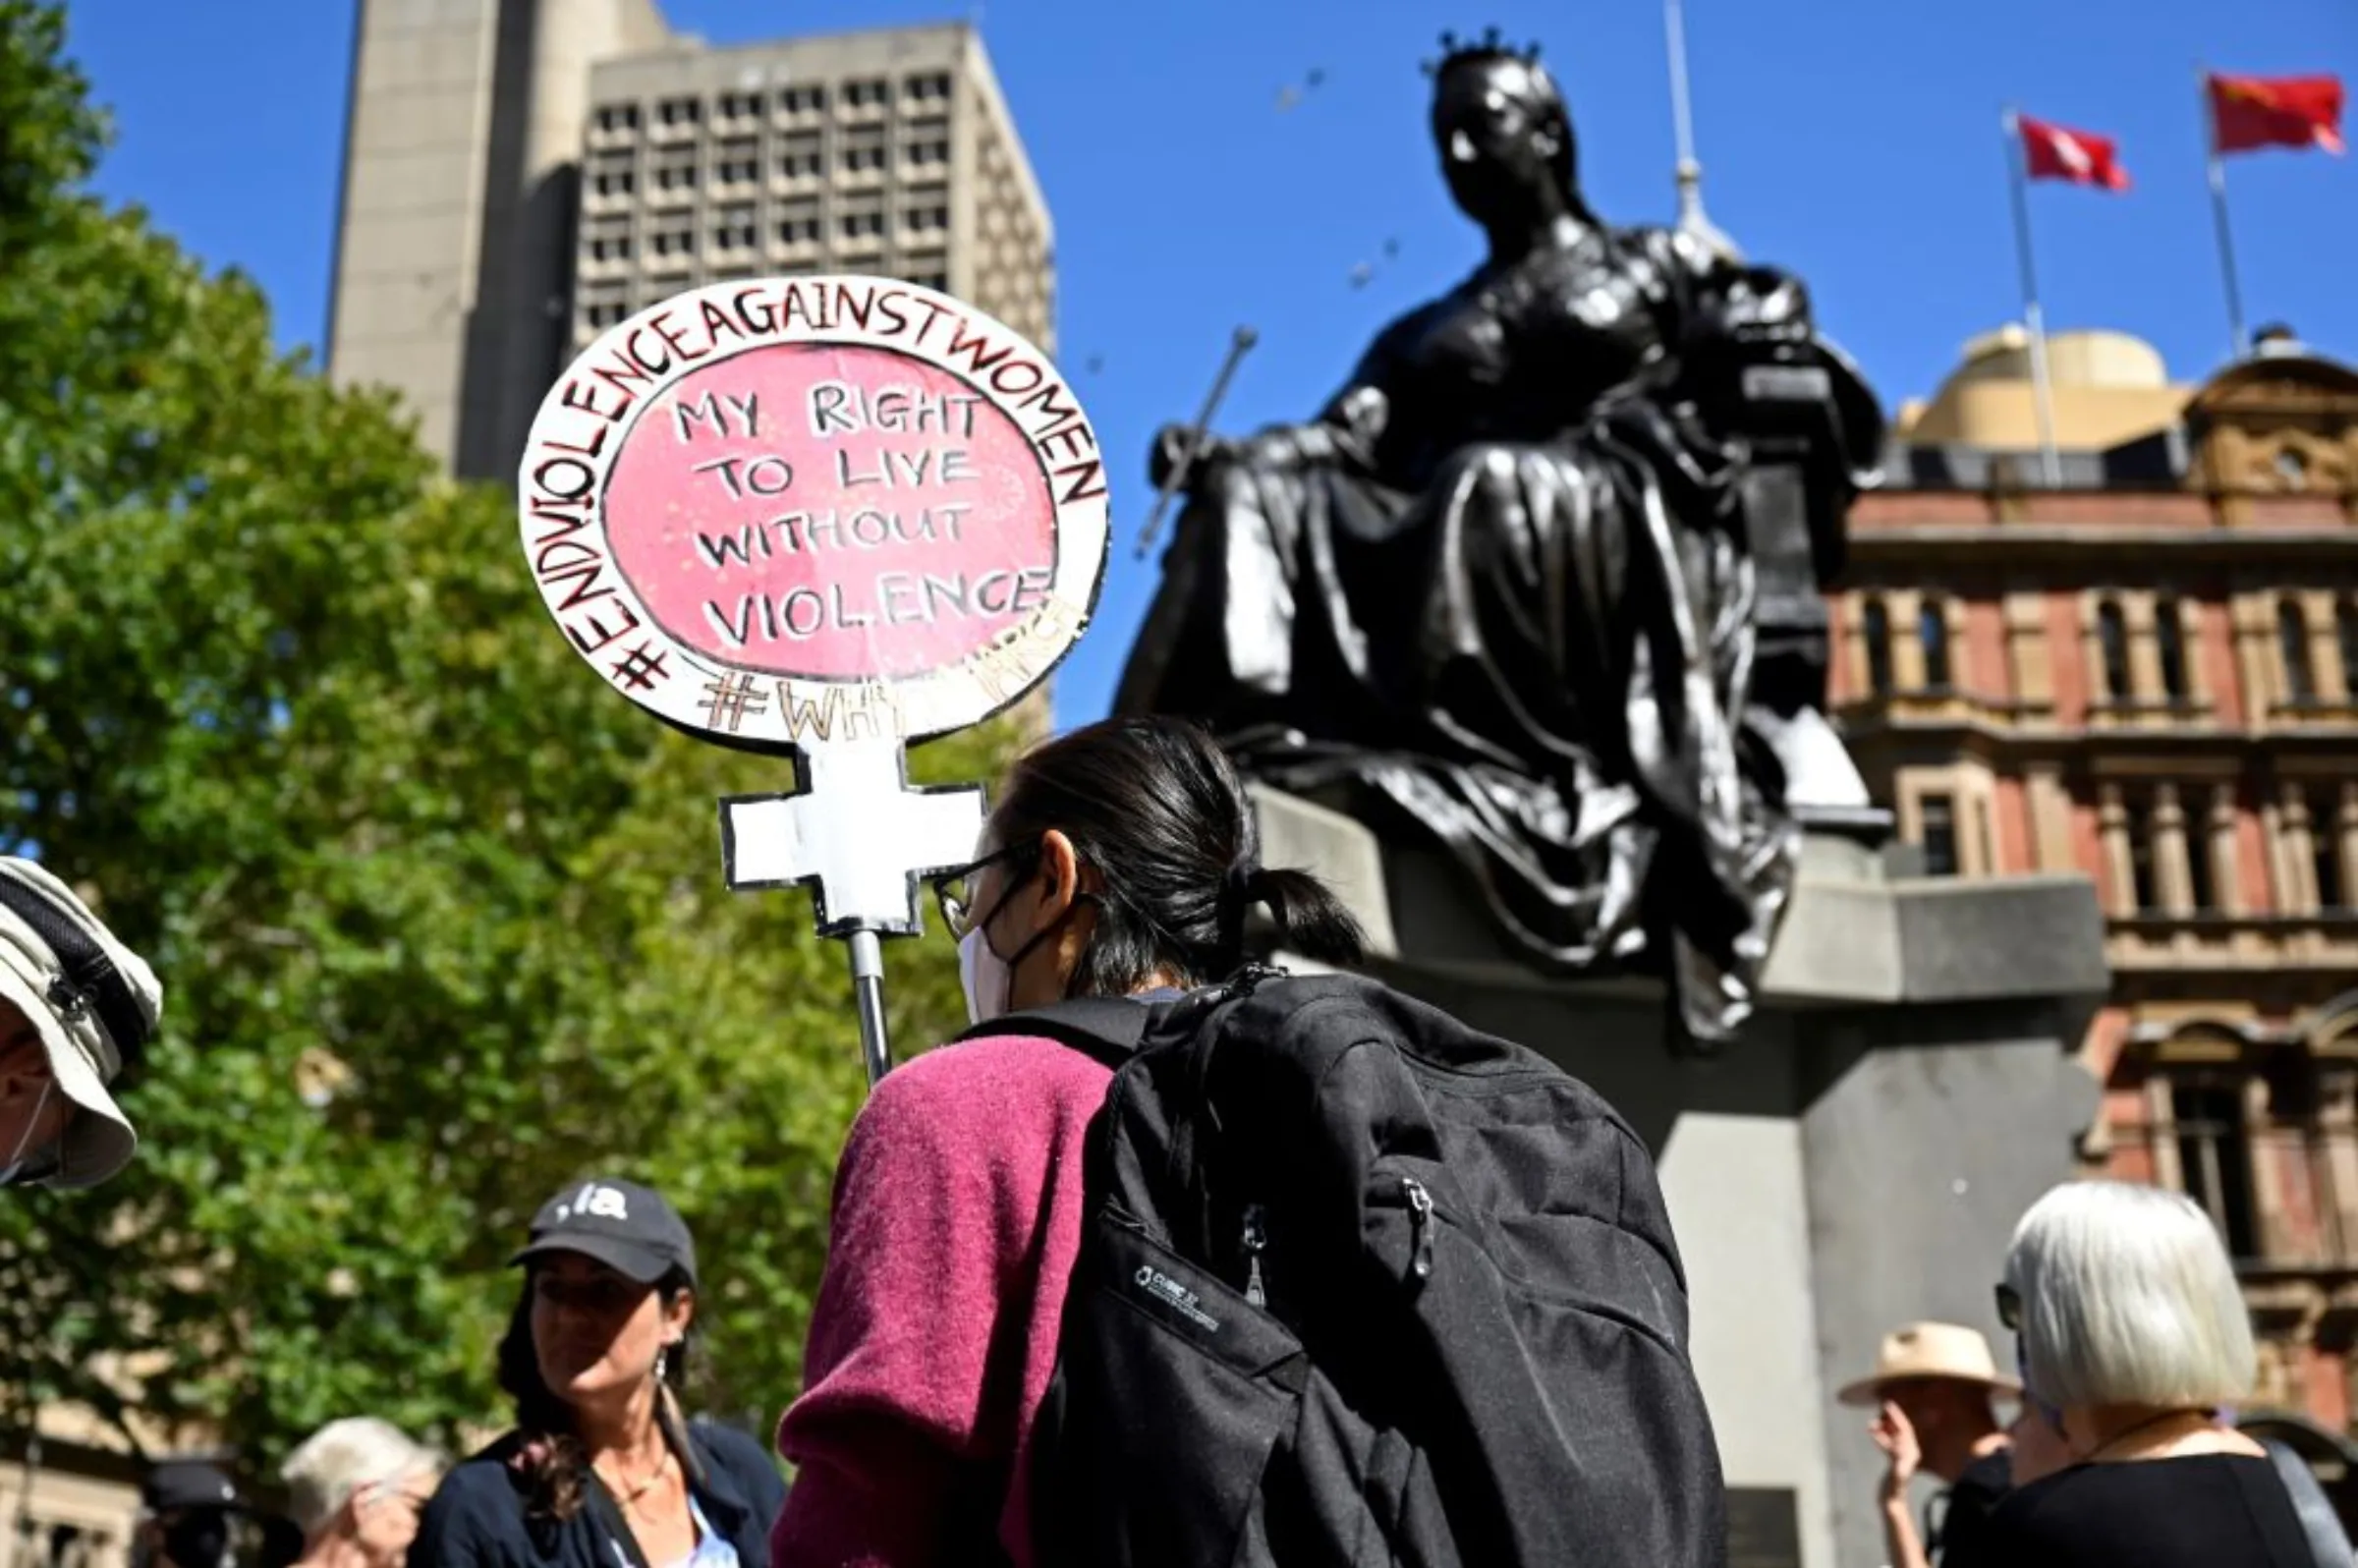 A protester holds a sign addressing violence against women in response to the treatment of women in politics following several sexual assault allegations, as part of the Women's March 4 Justice rally in Sydney, Australia, March 15, 2021